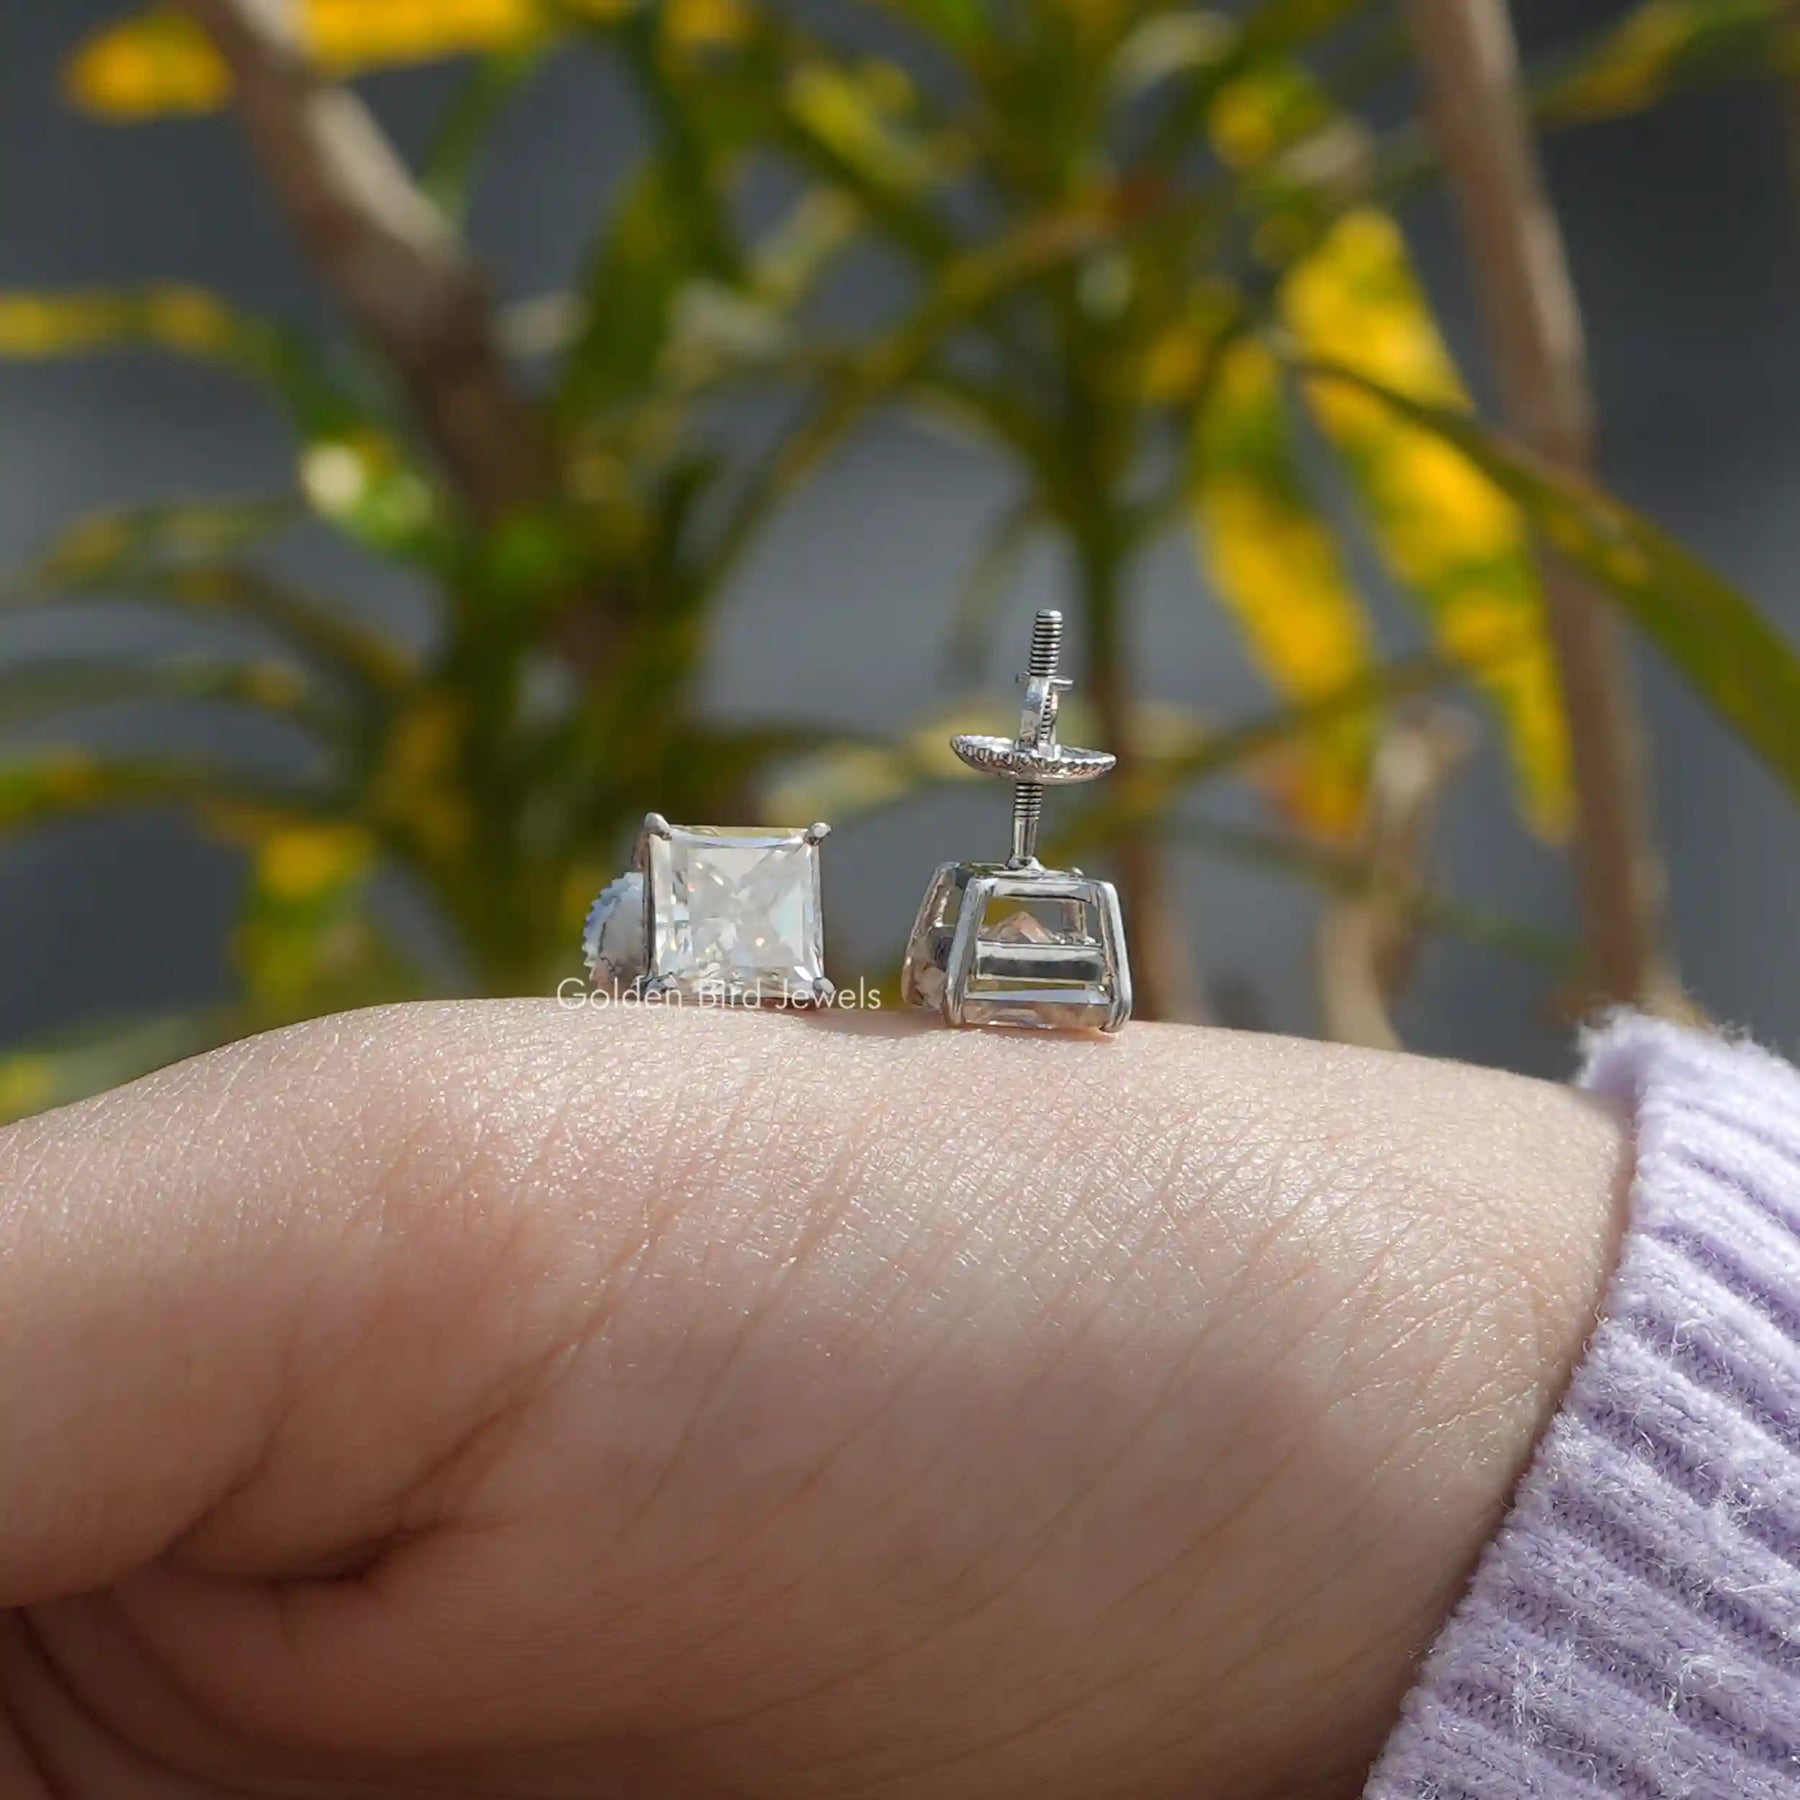 [This princess cut stud earrings made of white gold]-[Golden Bird Jewels]